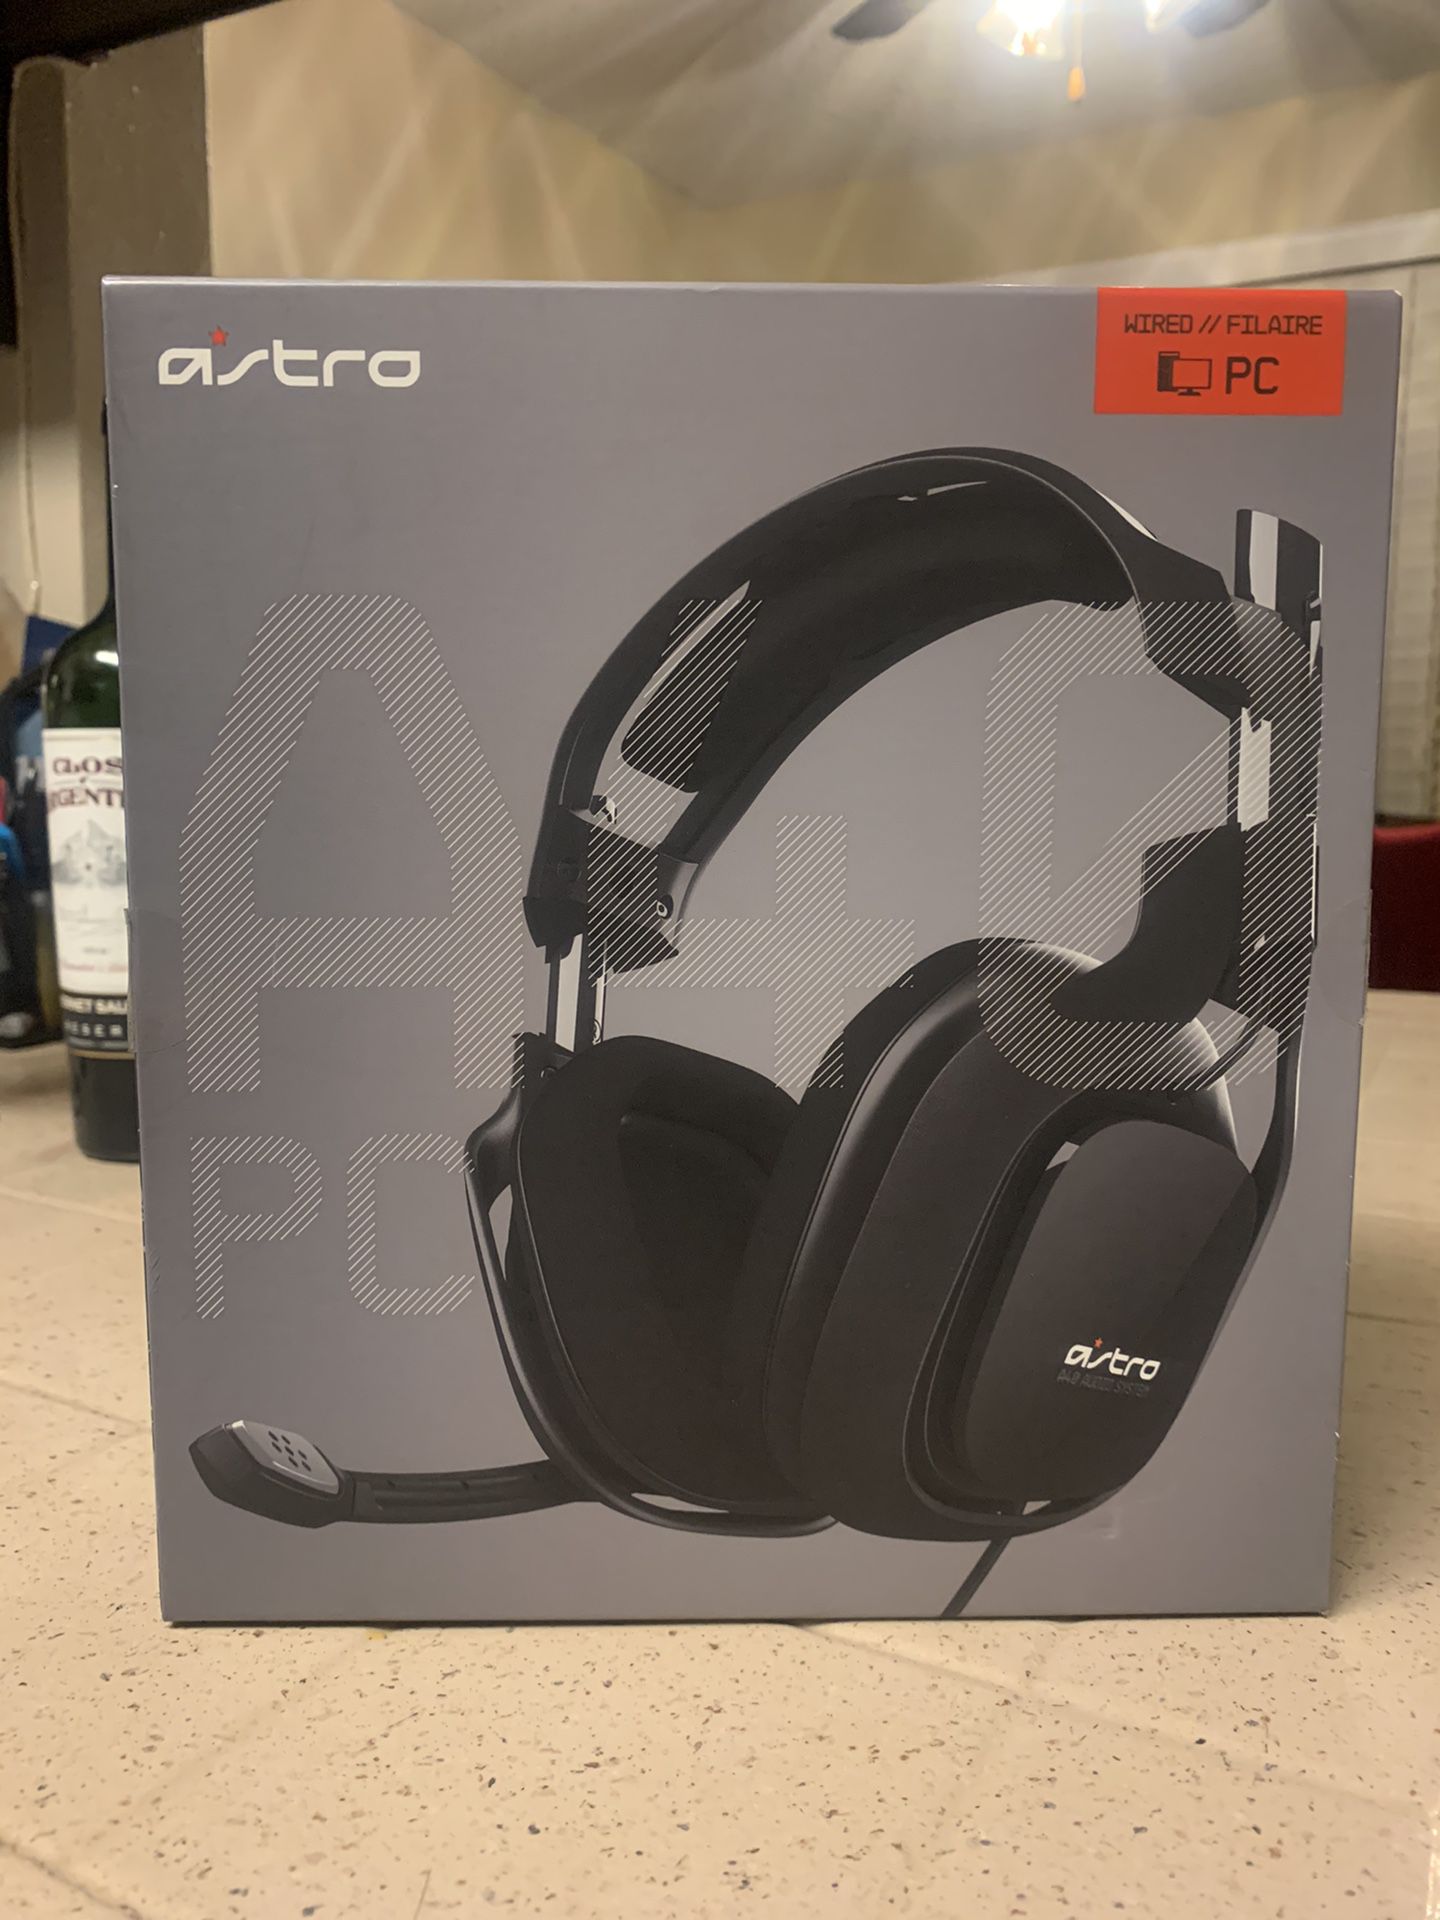 Astro Gaming Headphones A40 for PC